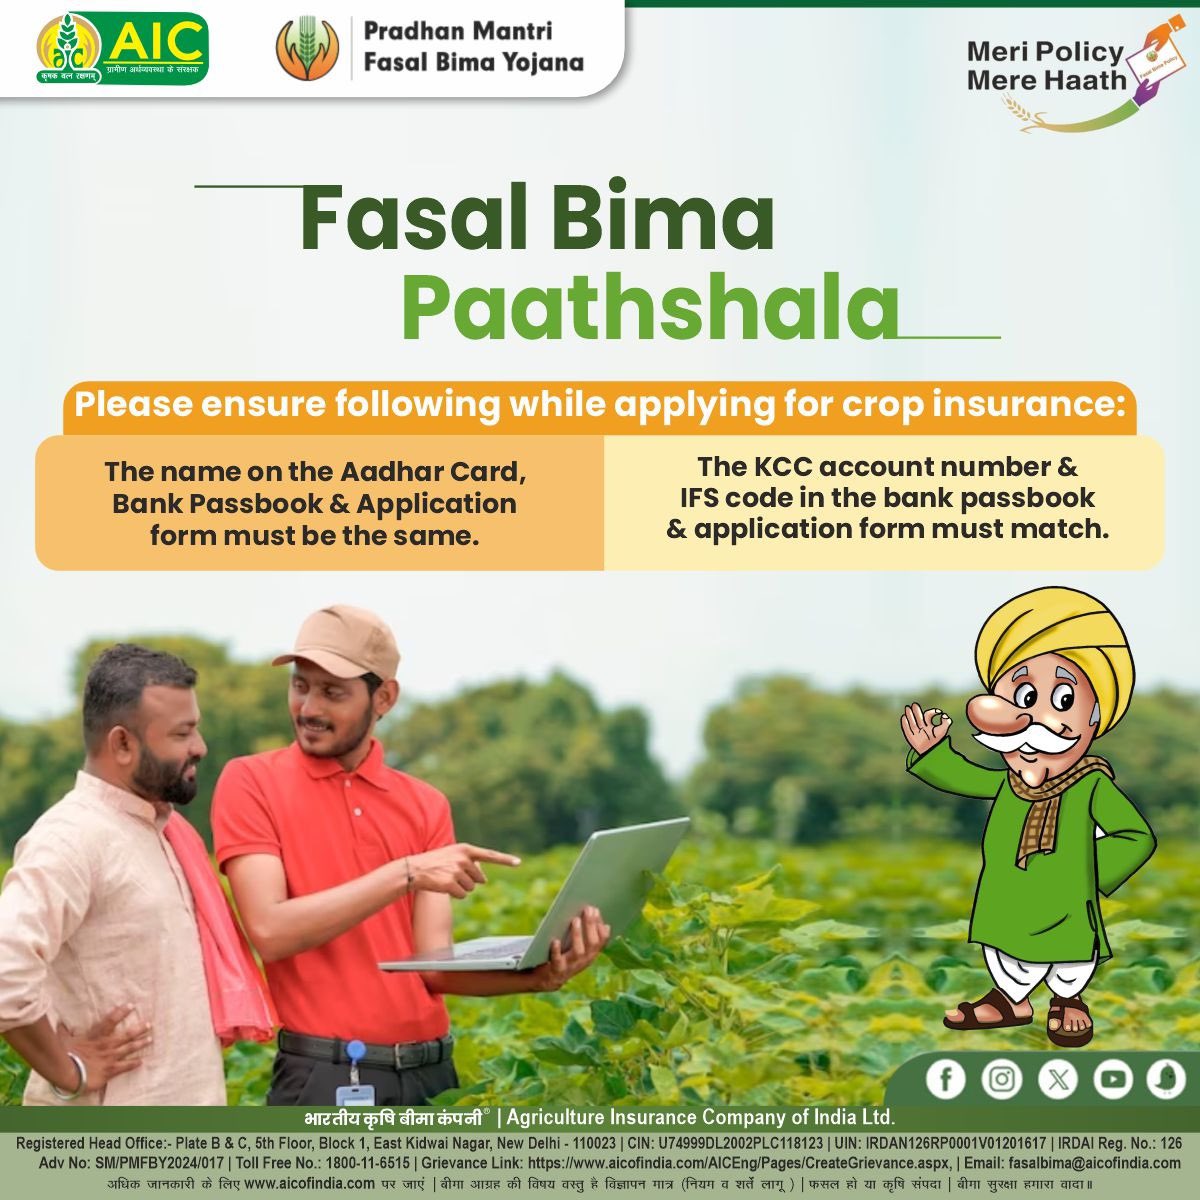 Check out the Important points to remember while applying for crop insurance under PMFBY. For more scheme-related info, visit pmfby.gov.in / aicofindia.com. #AIC #ग्रामीणअर्थव्यवस्थाकेसंरक्षक #FasalBimaKarao #फसलबीमाकराओ #AtmanirbharBharat #AtmanirbharKisan…